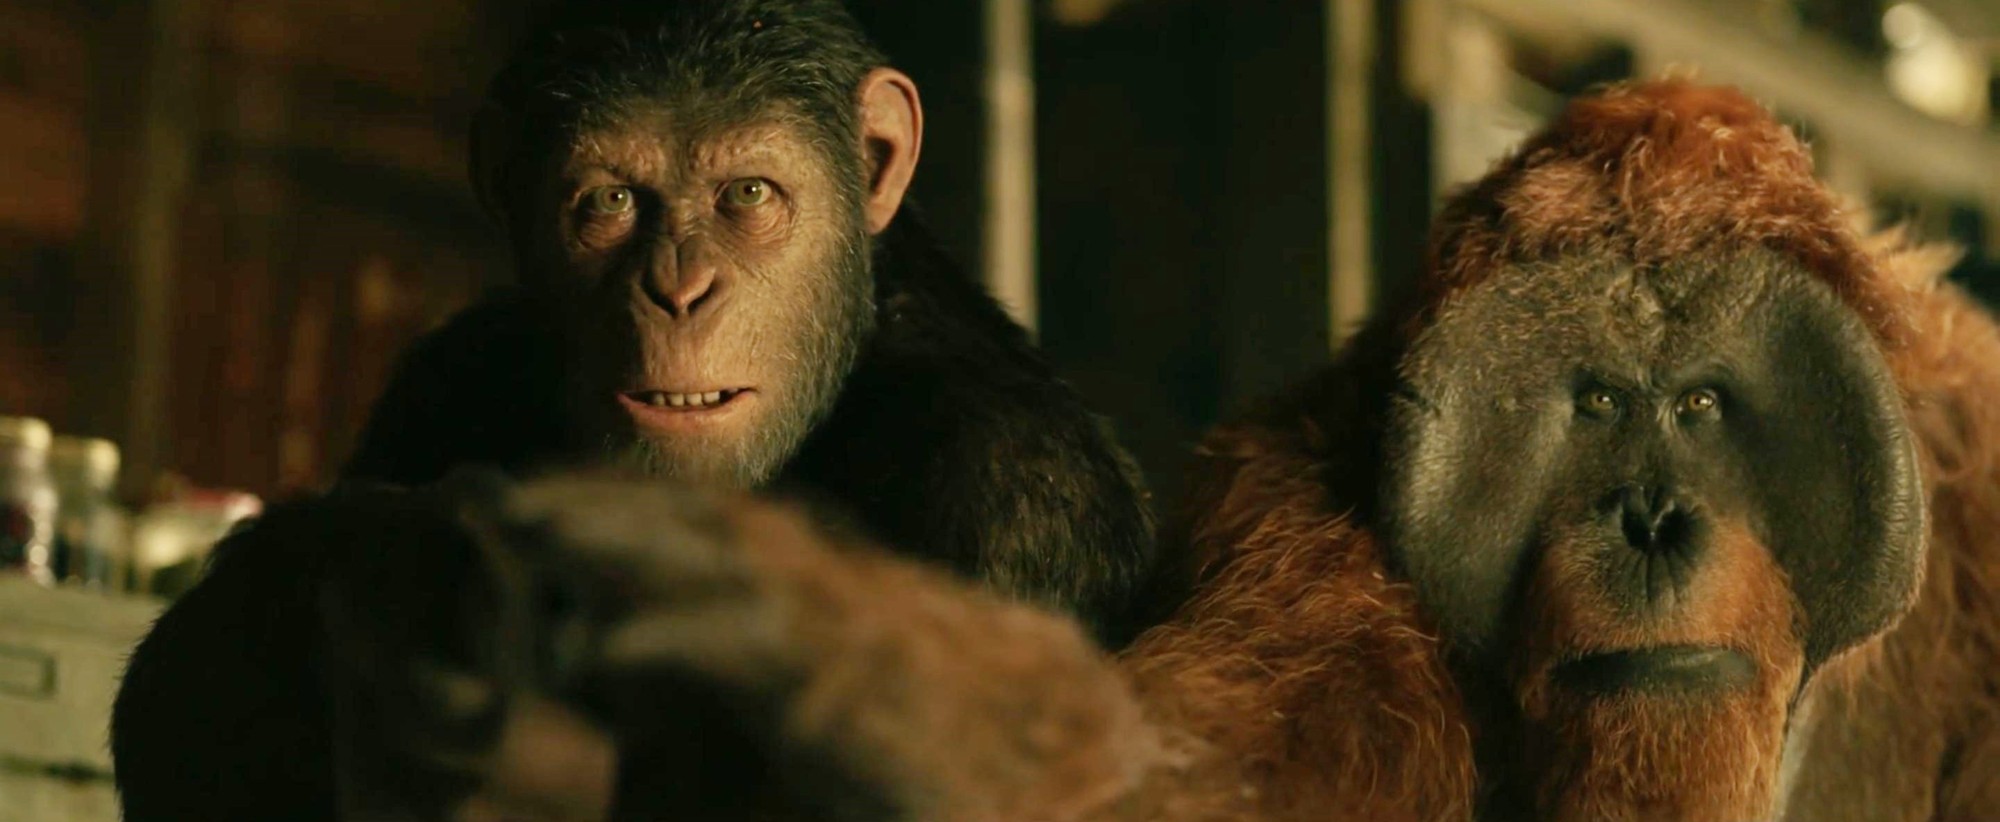 Caesar and Maurice from 20th Century Fox's War for the Planet of the Apes (2017)